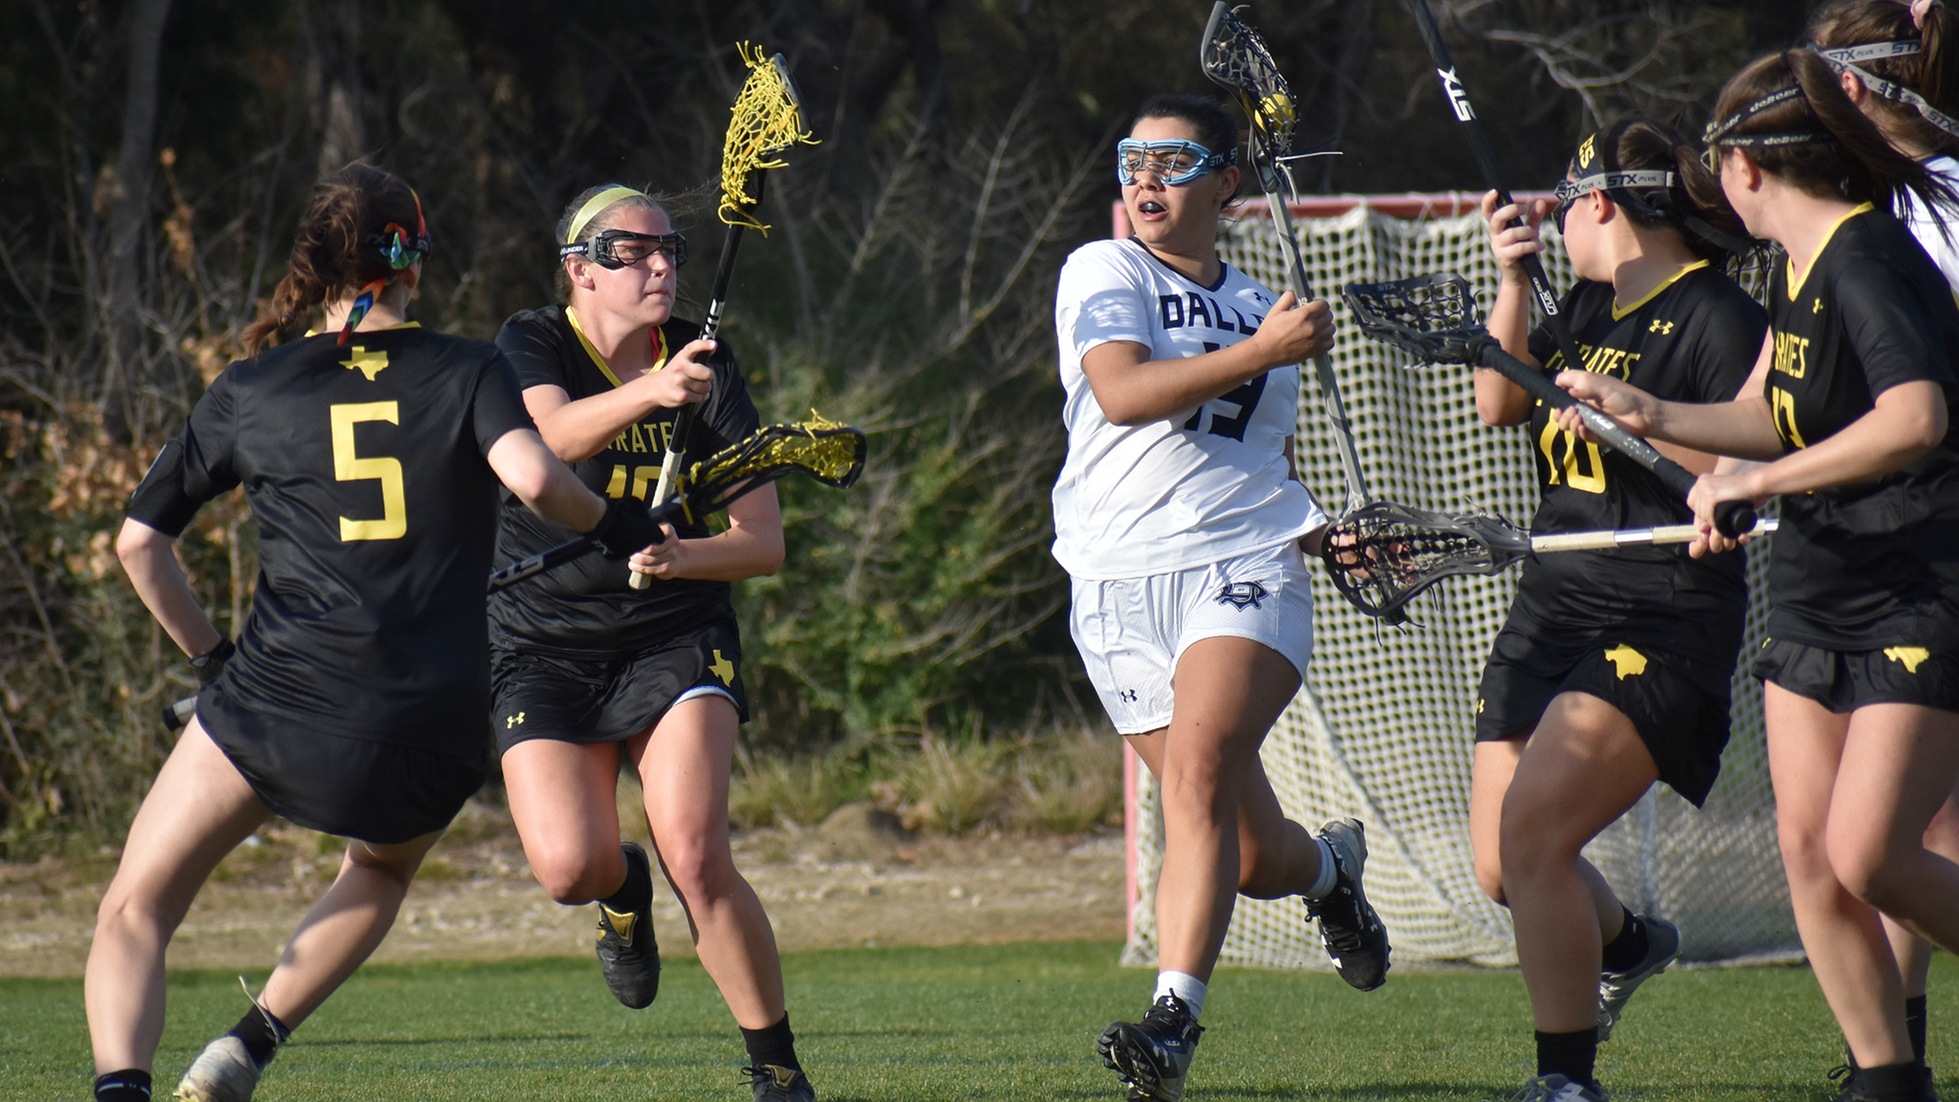 Pirates pull away from UD Women's Lacrosse on Saturday after Trading First 6 Goals